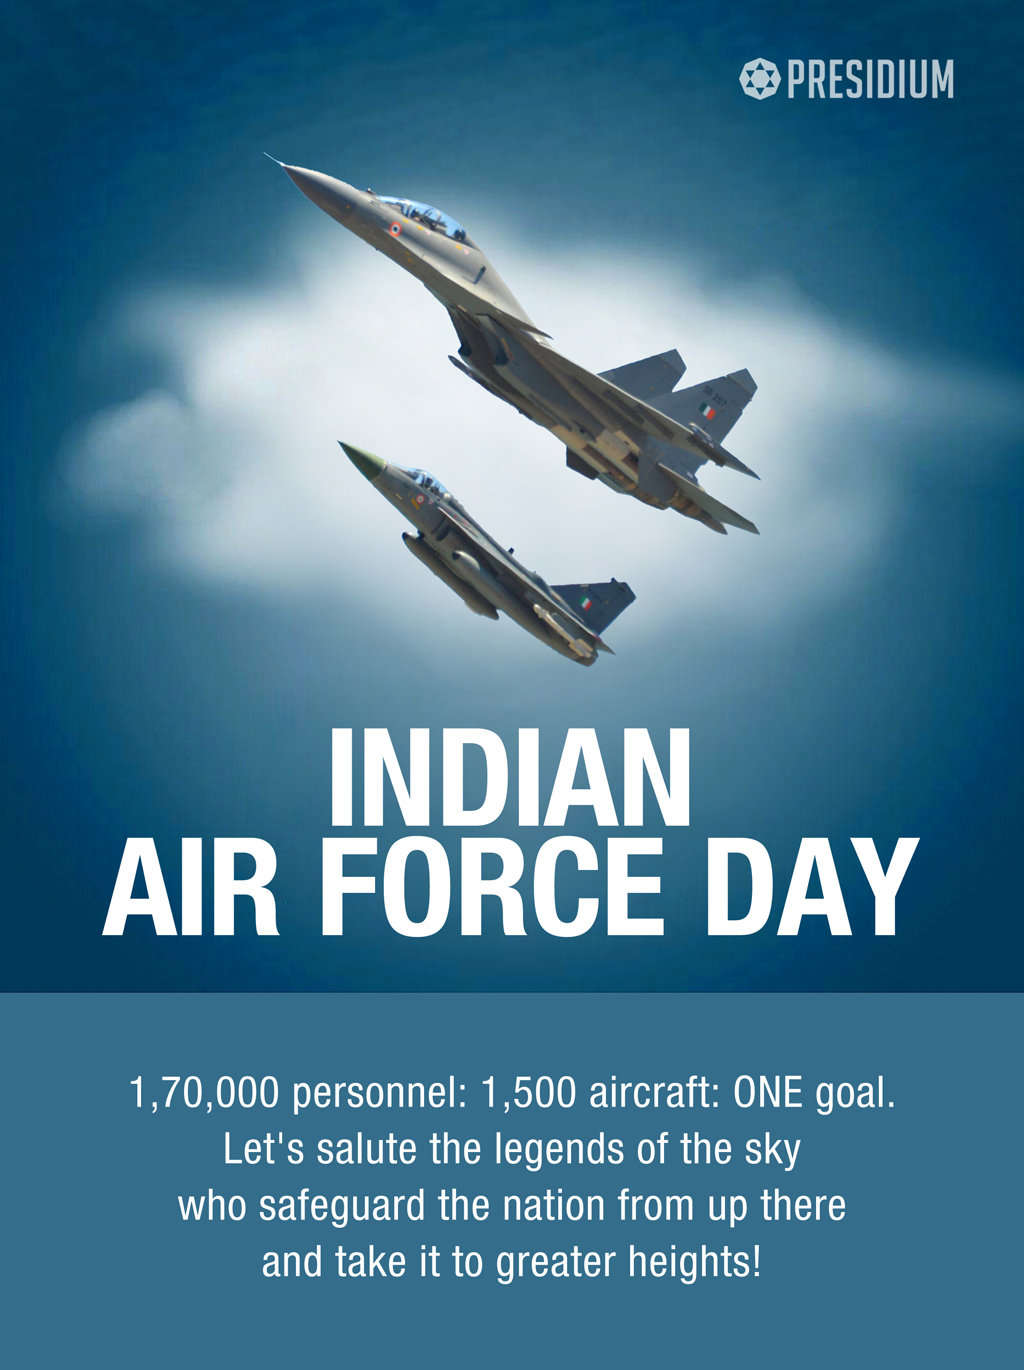 SALUTING THE CUSTODIANS OF THE SKY ON INDIAN AIR FORCE DAY 